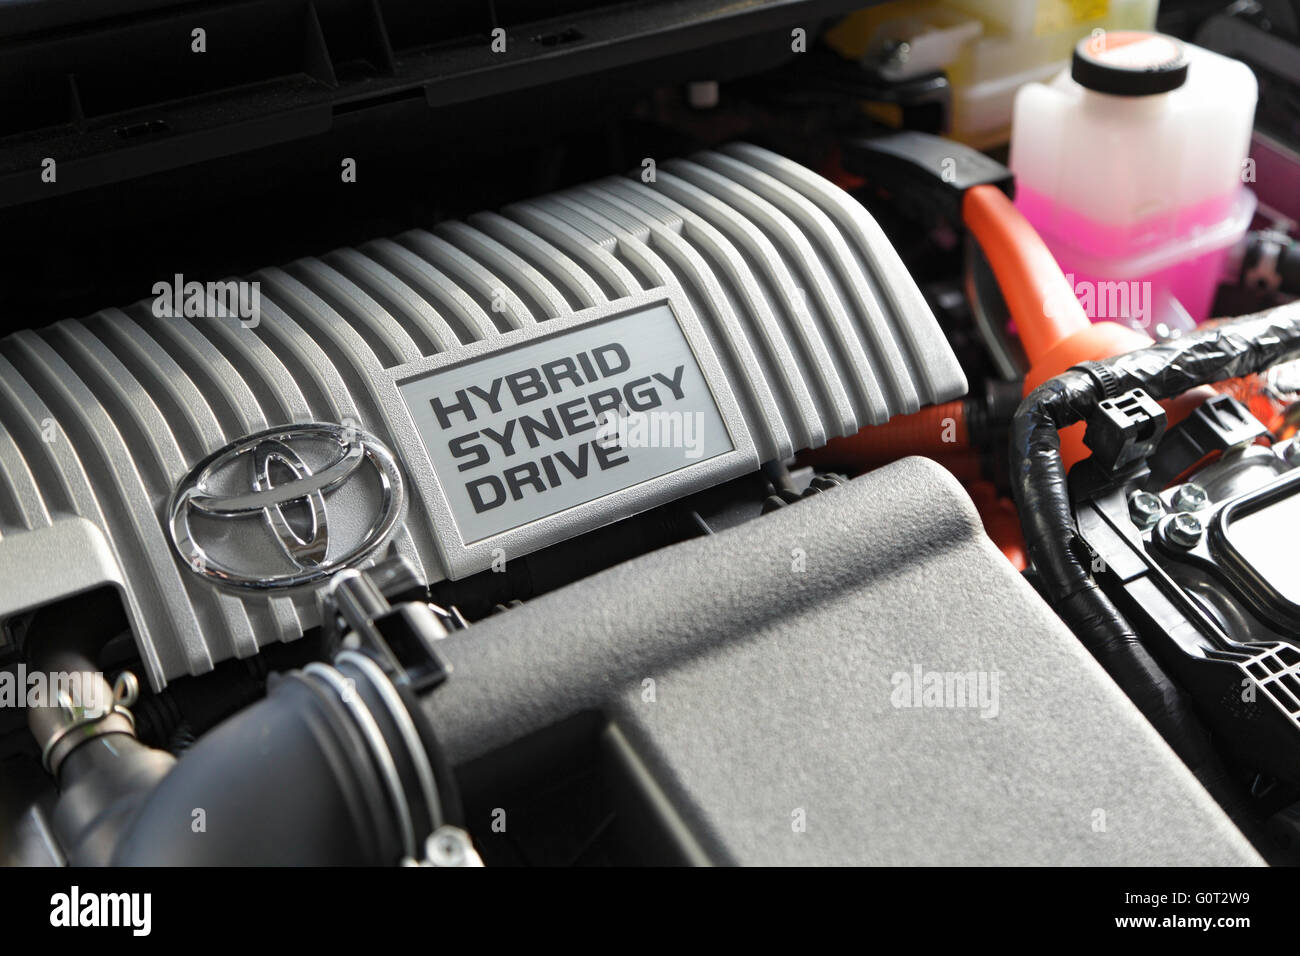 Hybrid Synergy Drive, Toyota Prius, USA Banque D'Images